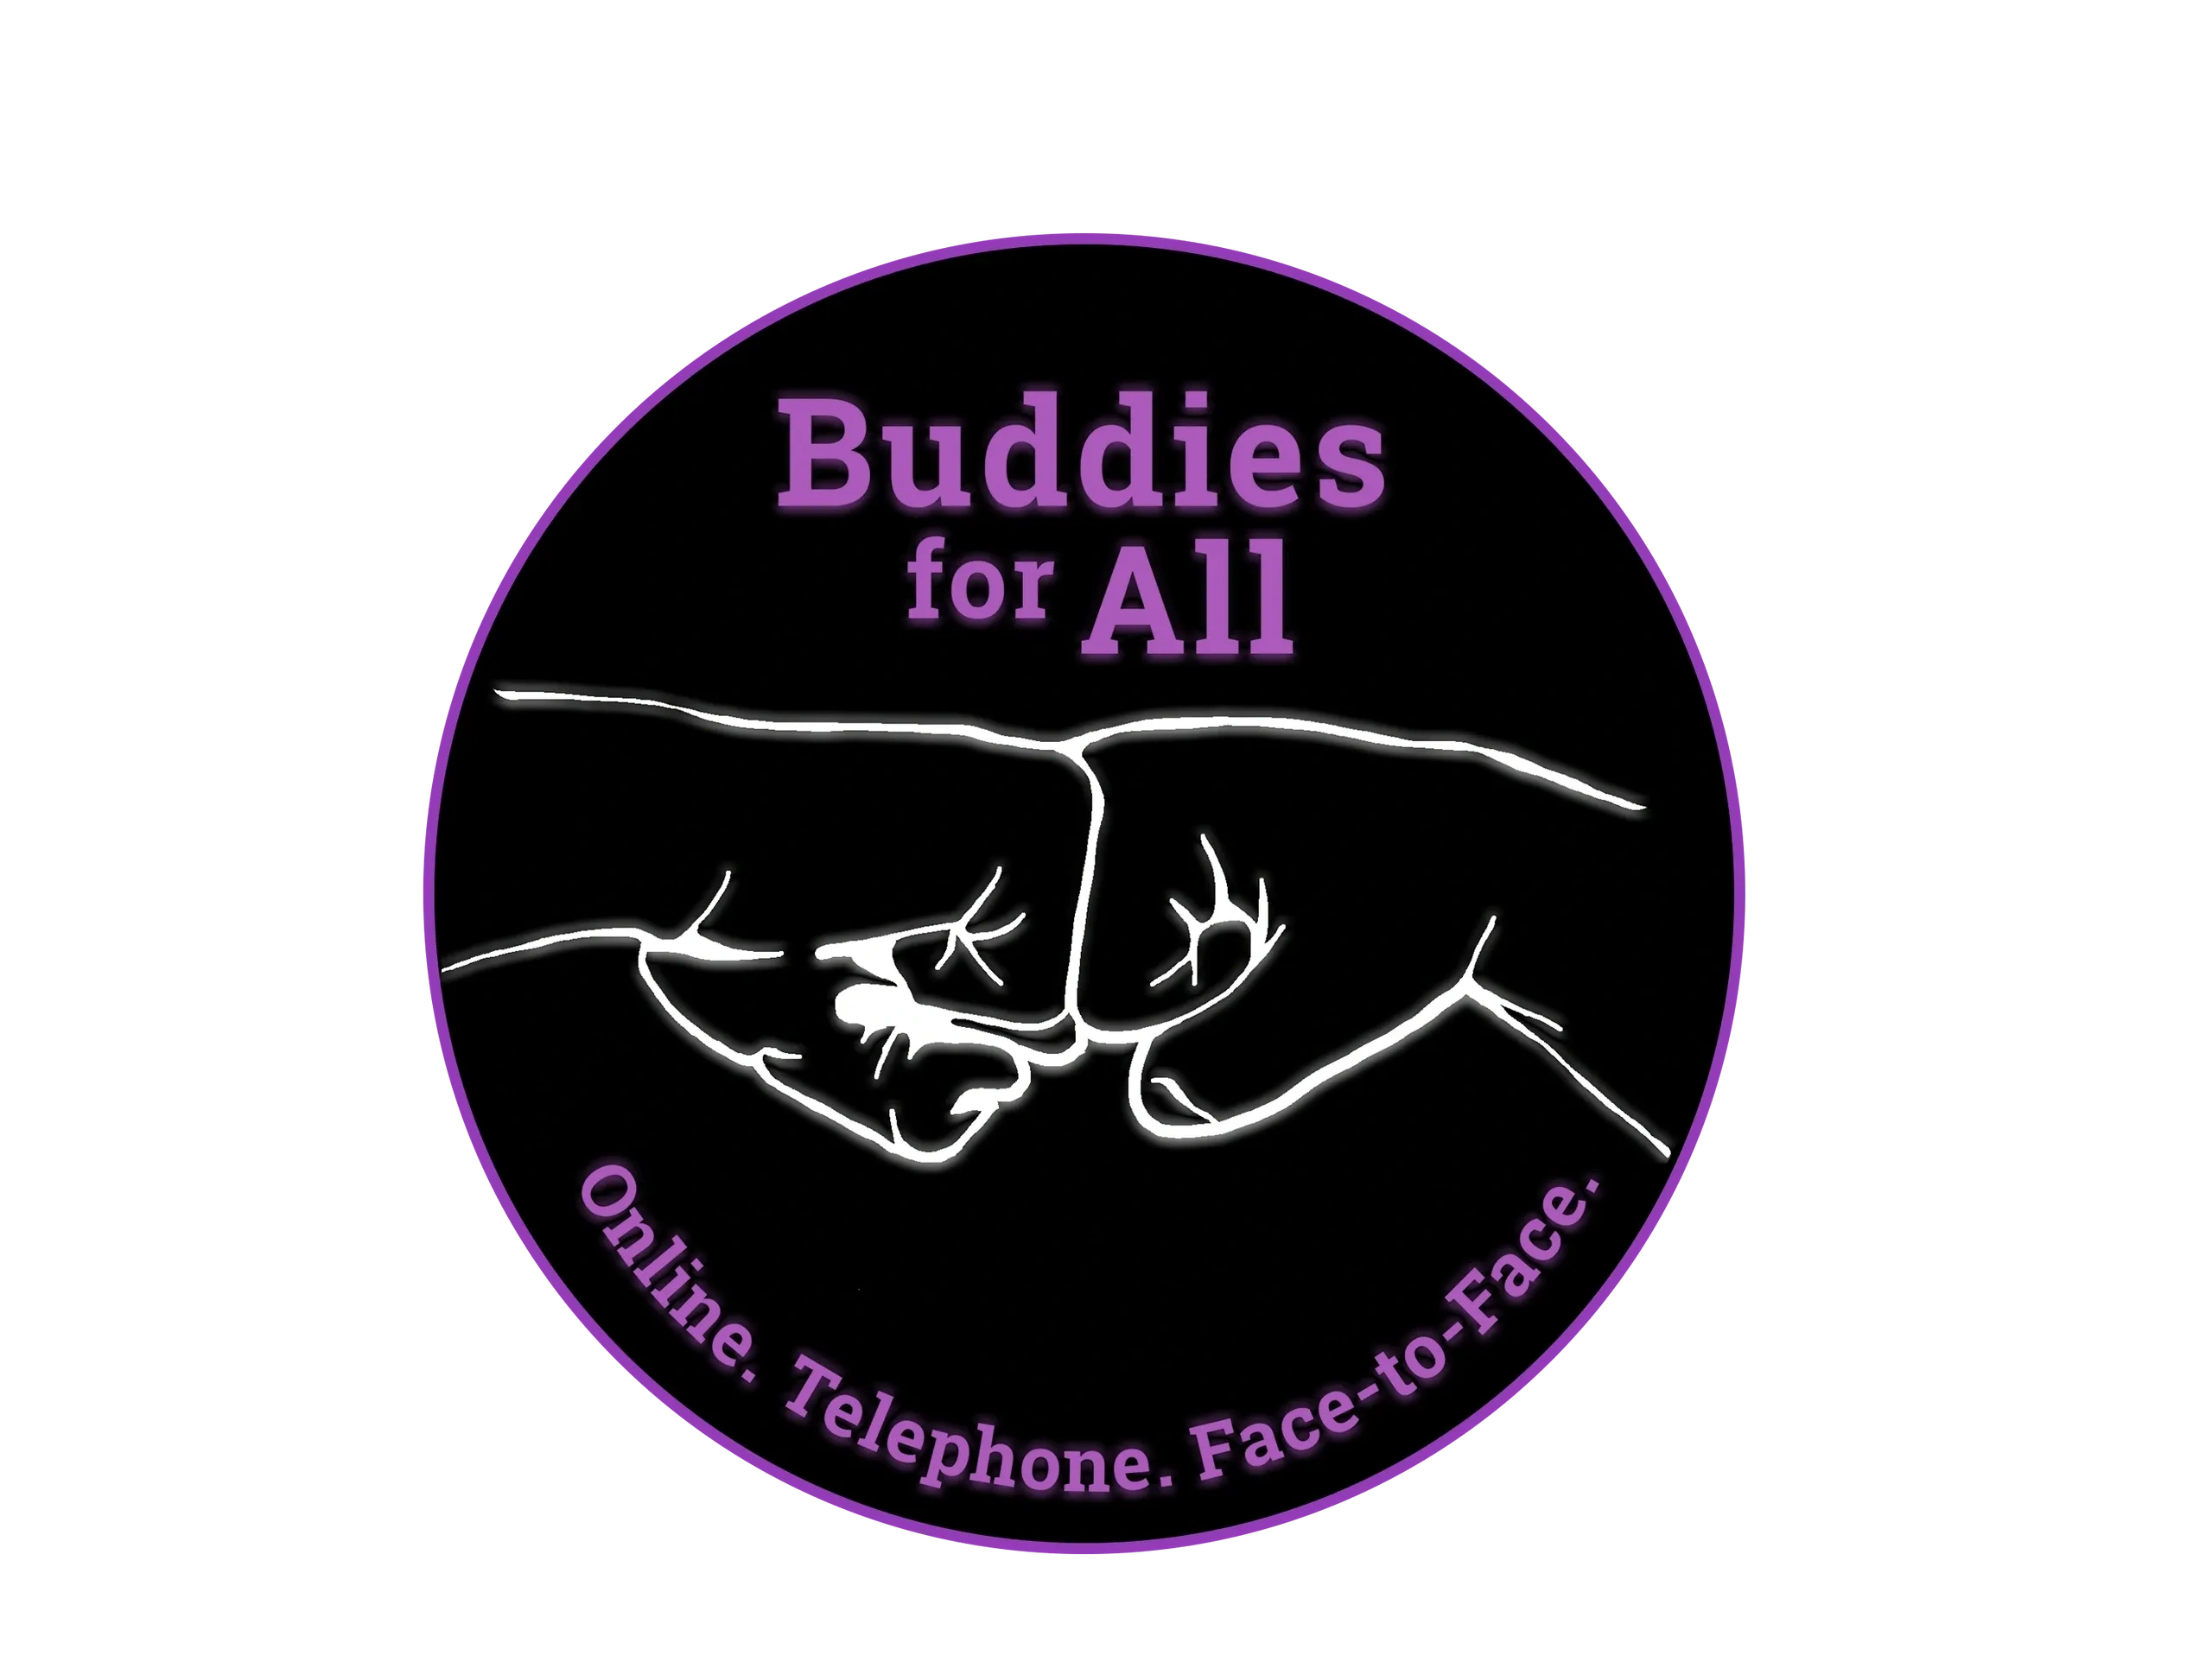 The Buddies for All logo. A round black circle with purple text. Two white fists bumps.